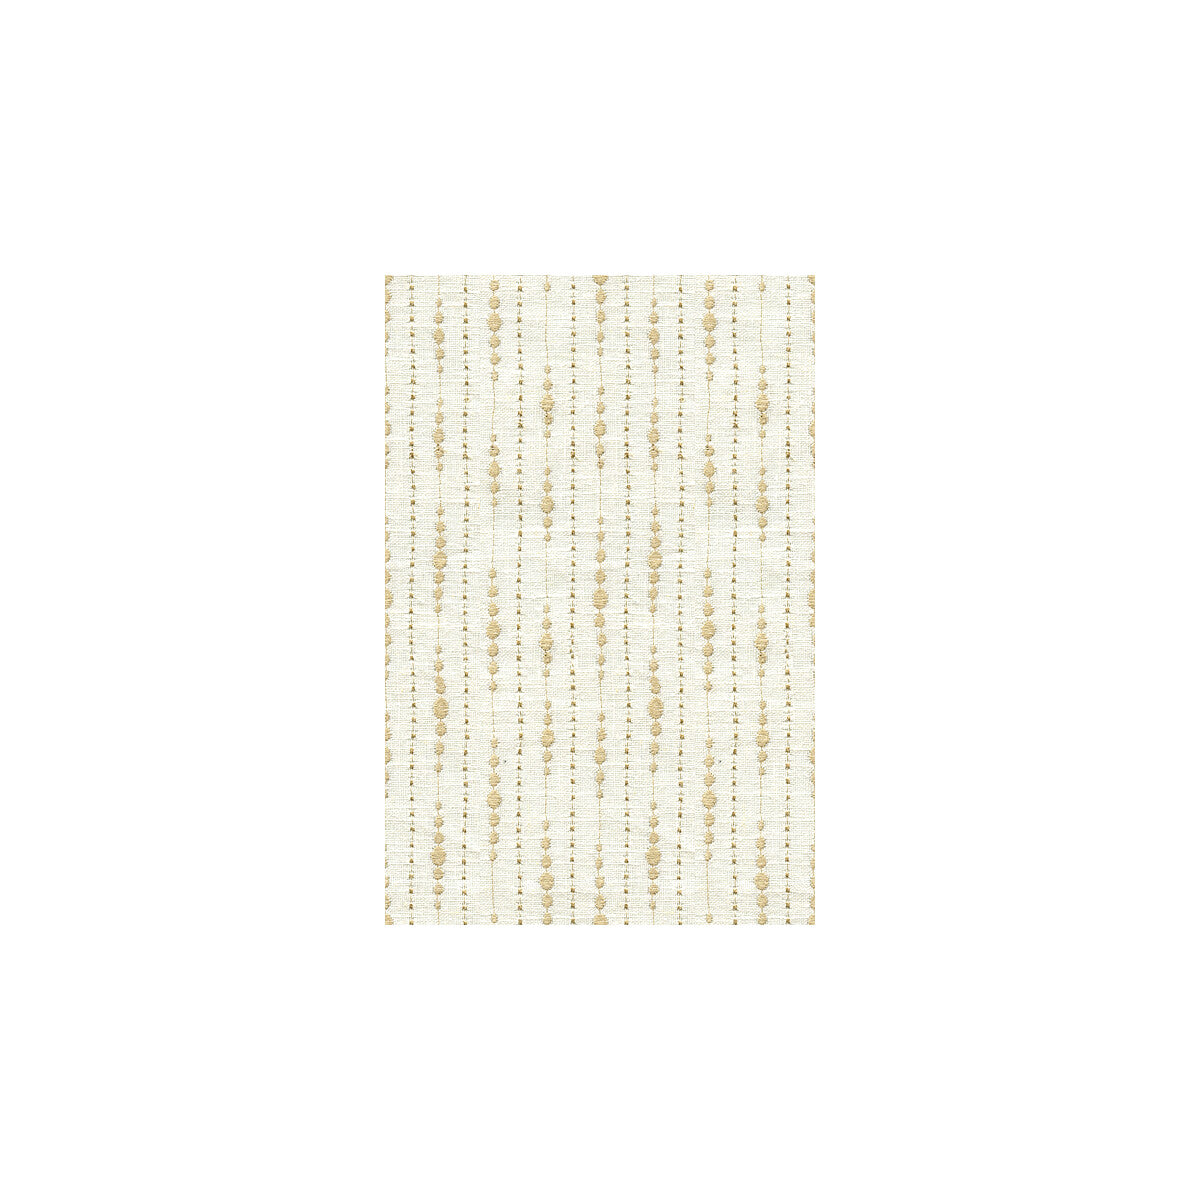 Fabius fabric in sand color - pattern 9814.1.0 - by Kravet Design in the Thom Filicia collection